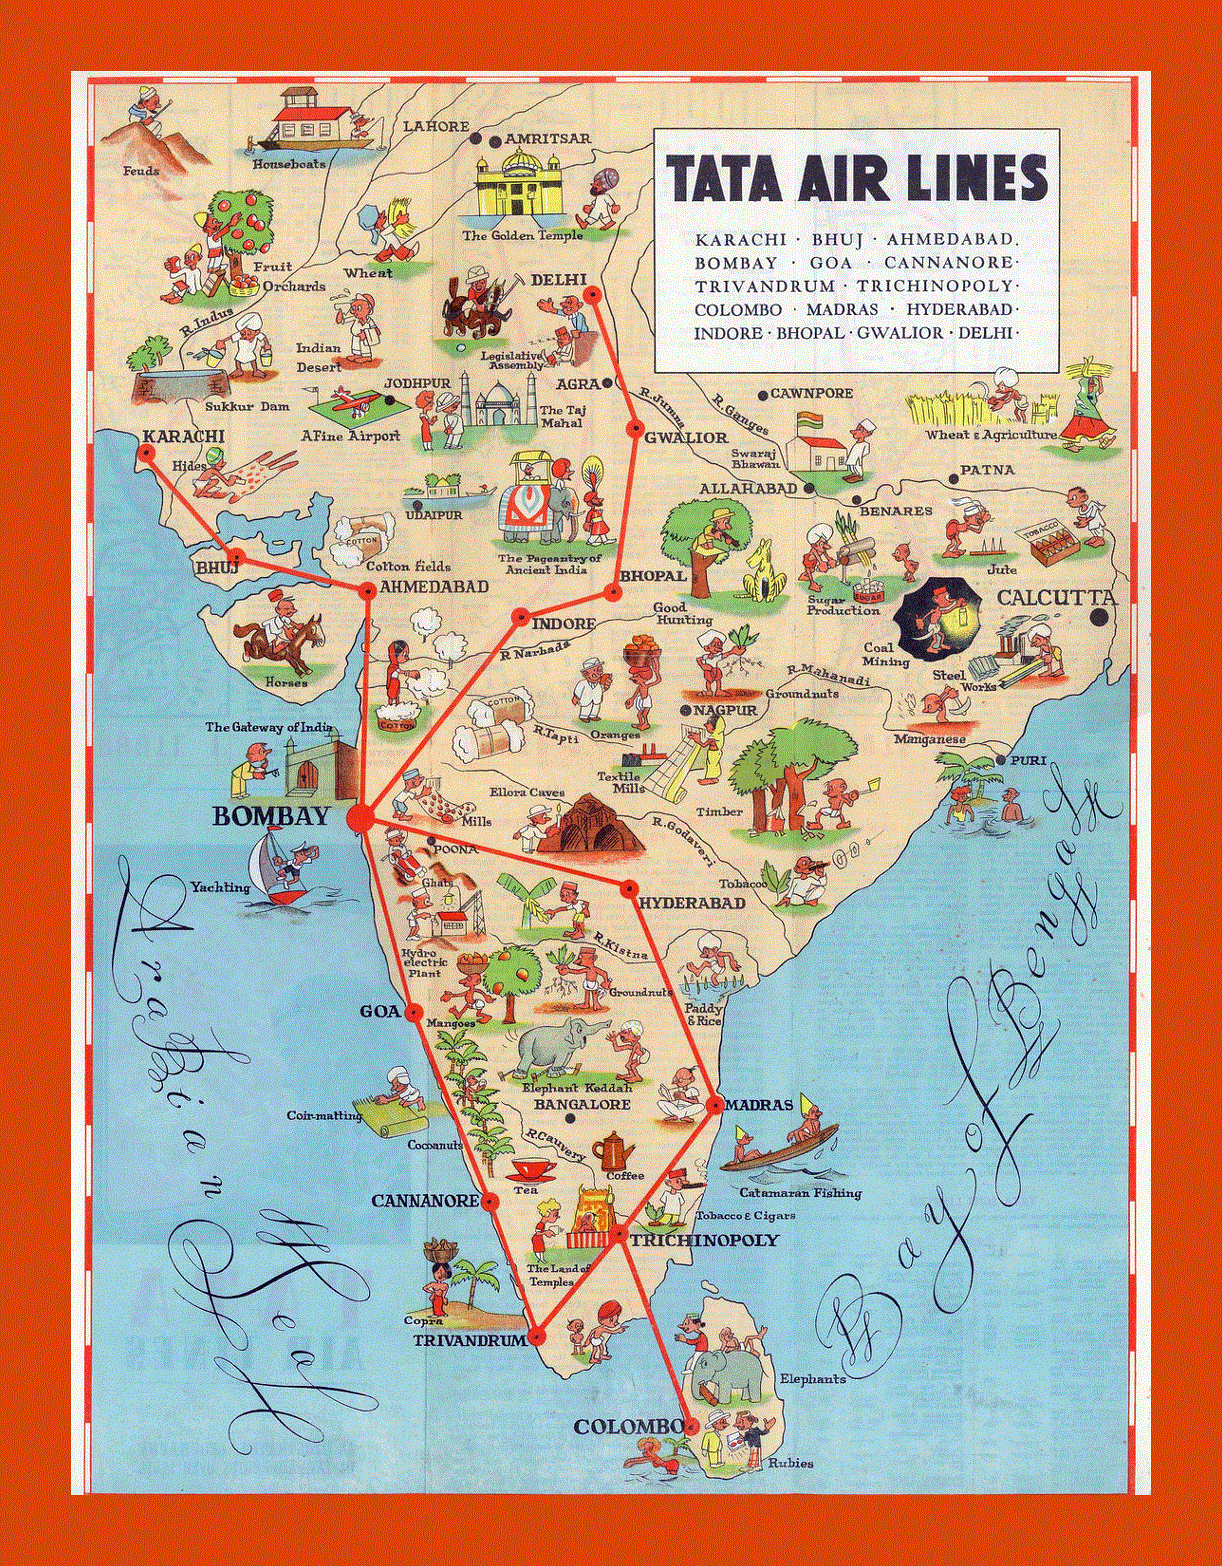 Tourist illustrated map of India